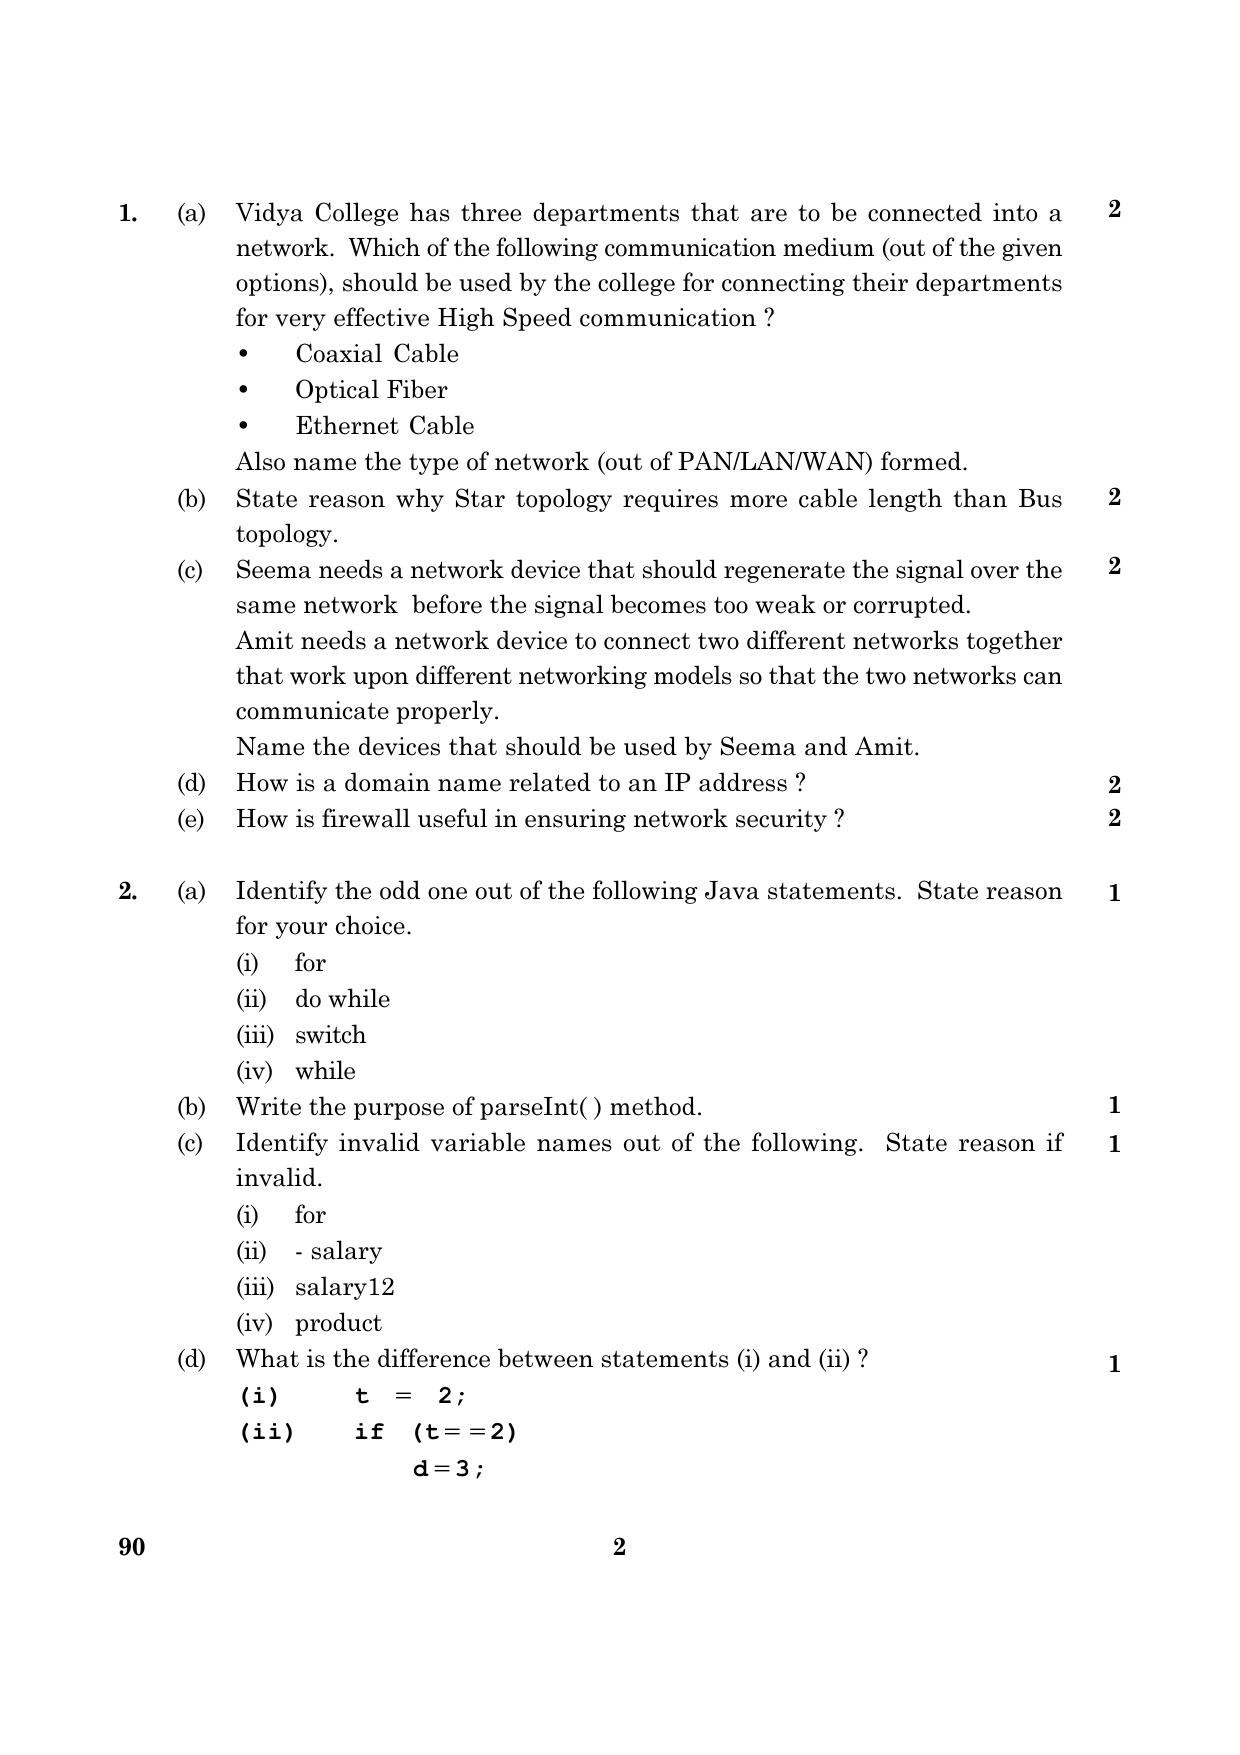 CBSE Class 12 090 INFORMATIC PRACTICES 2016 Question Paper - Page 2